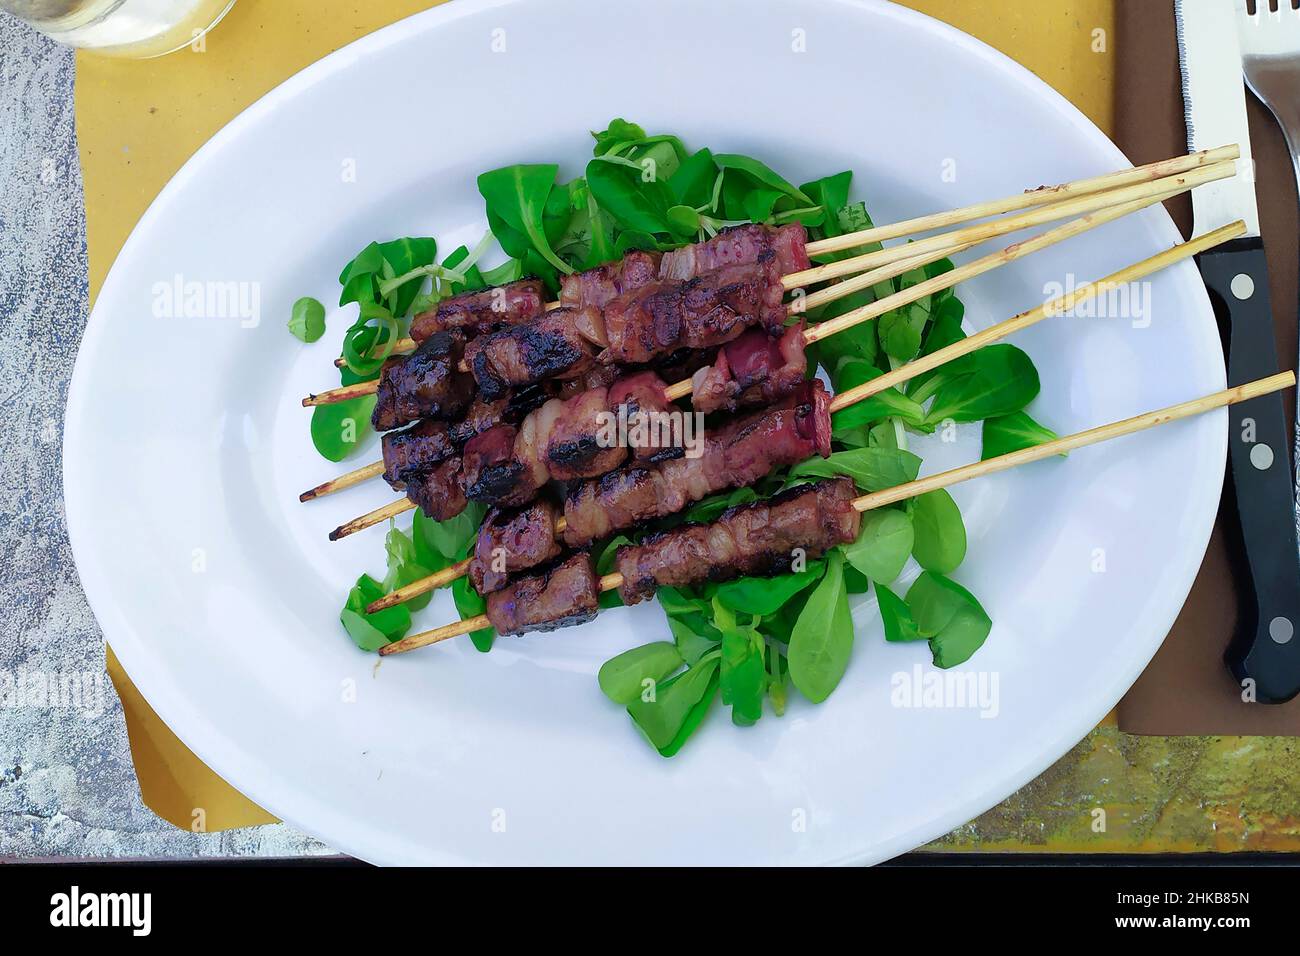 Food, Second dish, Onion and Liver Arrosticini Stock Photo